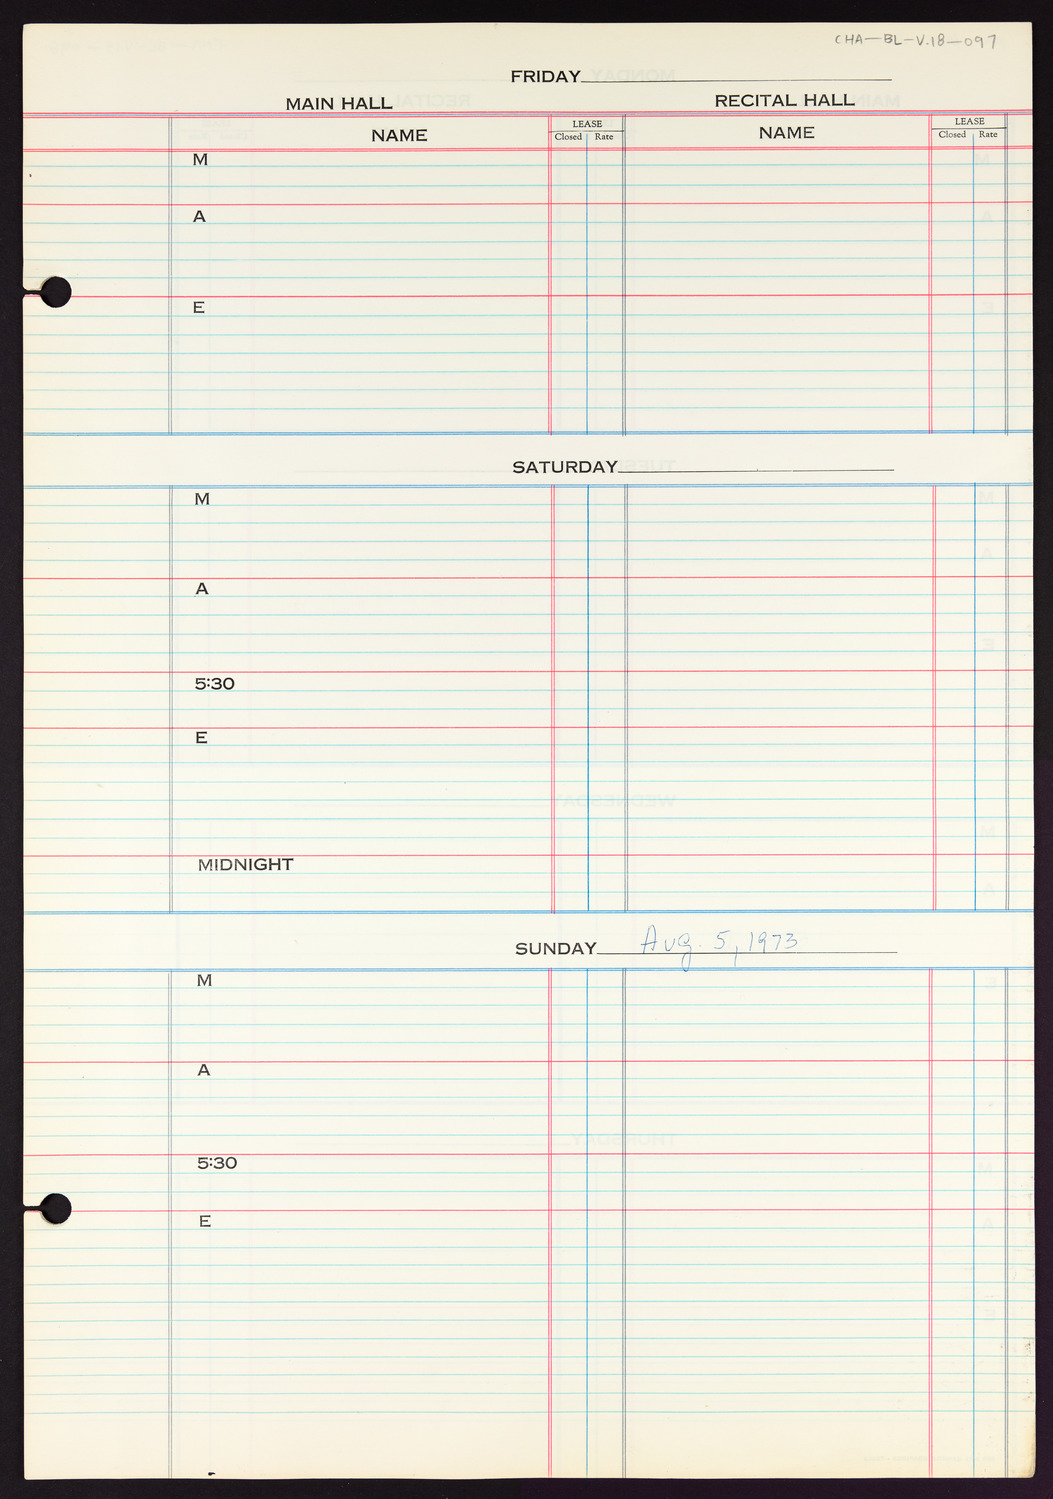 Carnegie Hall Booking Ledger, volume 18, page 97